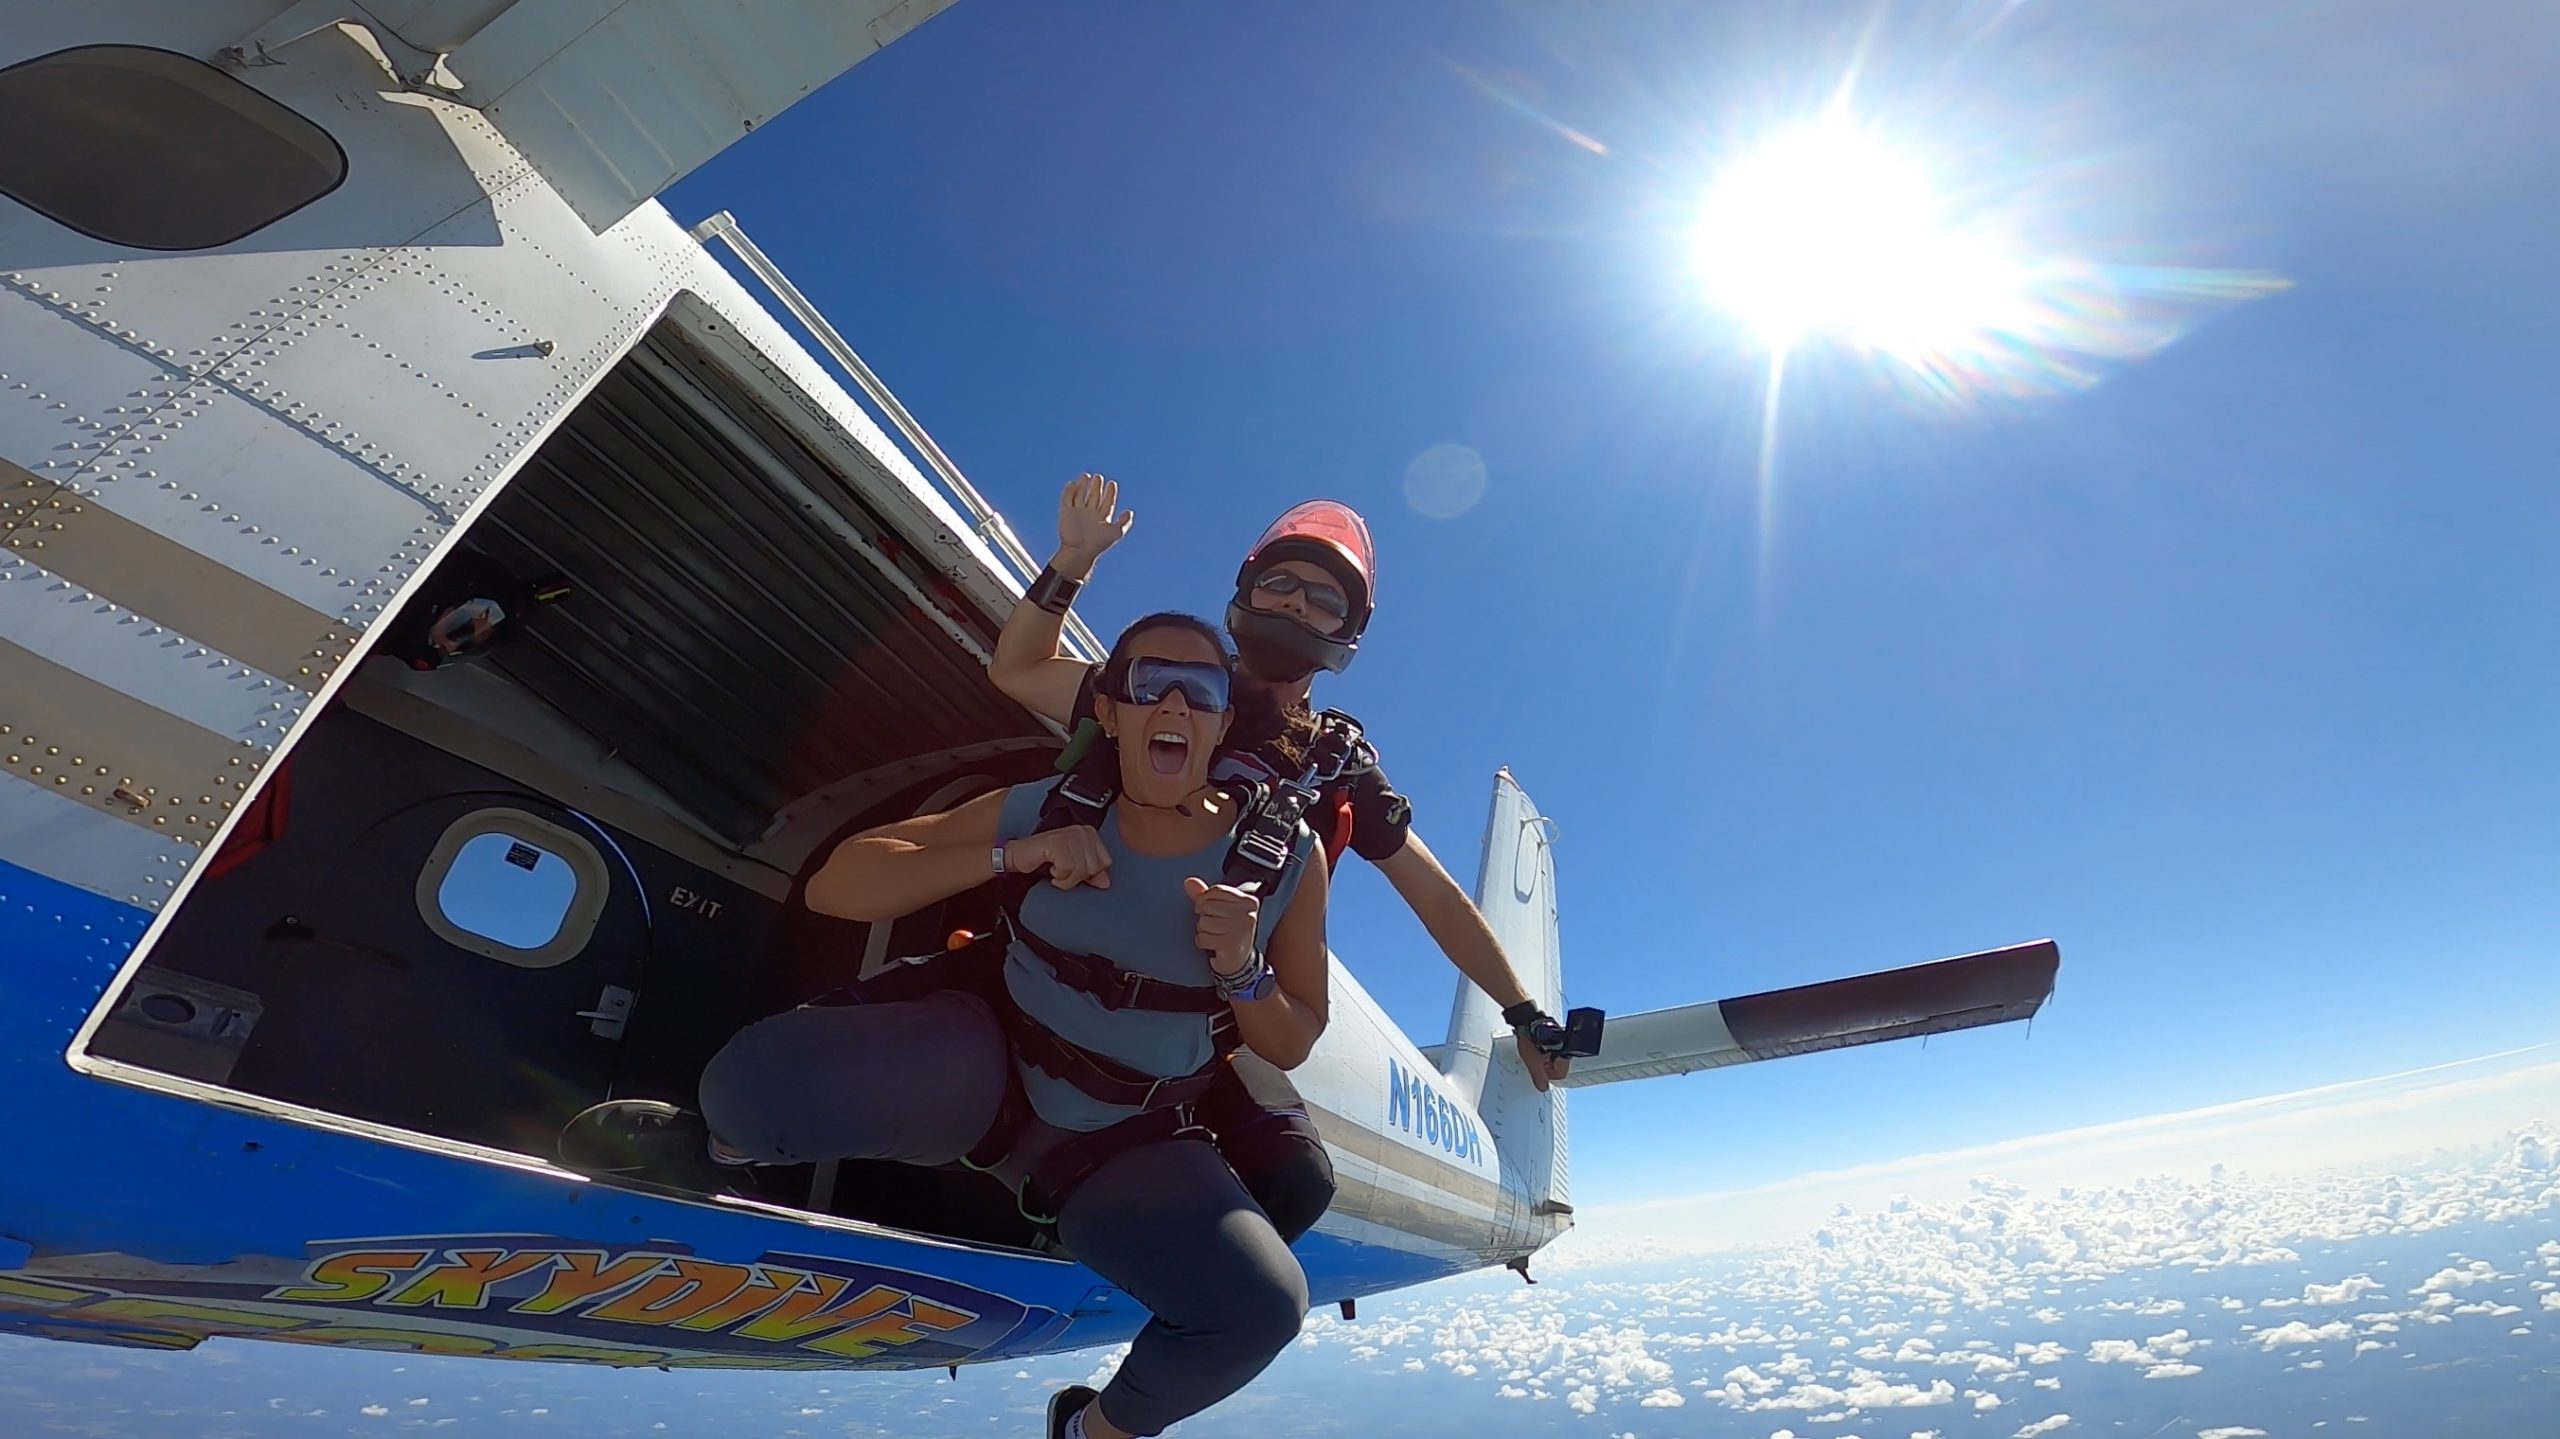 black woman just jumped out of a plane attached to an instructor in a tandem skydive at Skydive Georgia. She is screaming happily in the blue skies with sun shining bright